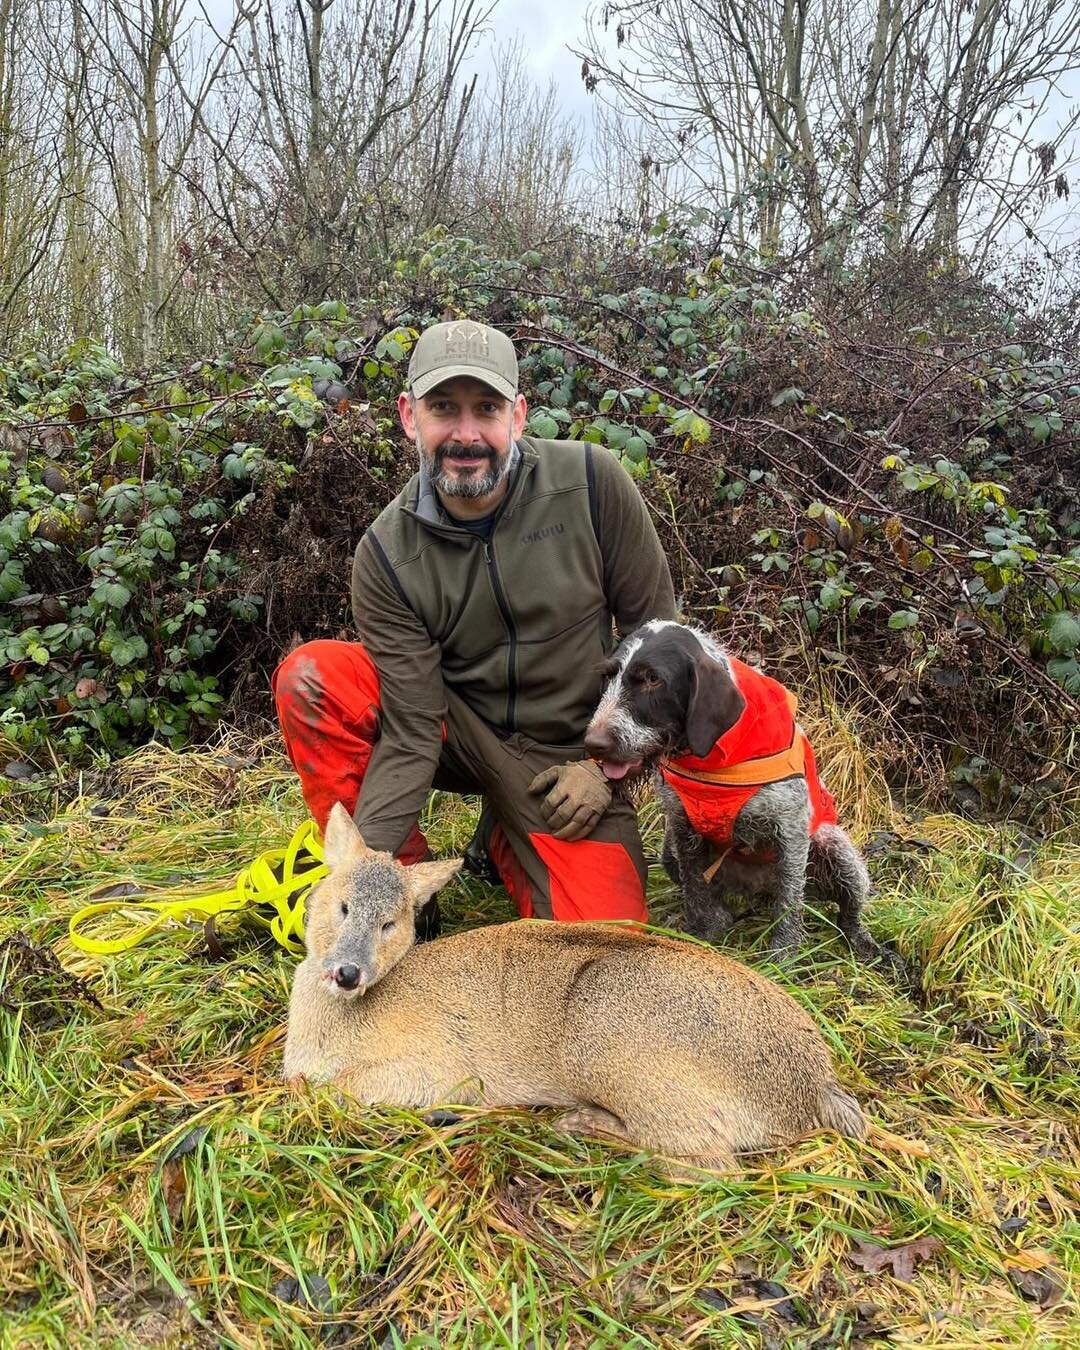 A good recovery this morning for Alan Hayes &amp; Skye on a  Chinese water deer..
Short track and despatch after being brought to bay..
Well done to all involved 👏👏
Many thanks for putting your trust in UKDTR 🦌🐕🦌🐕
To find the number for your ne